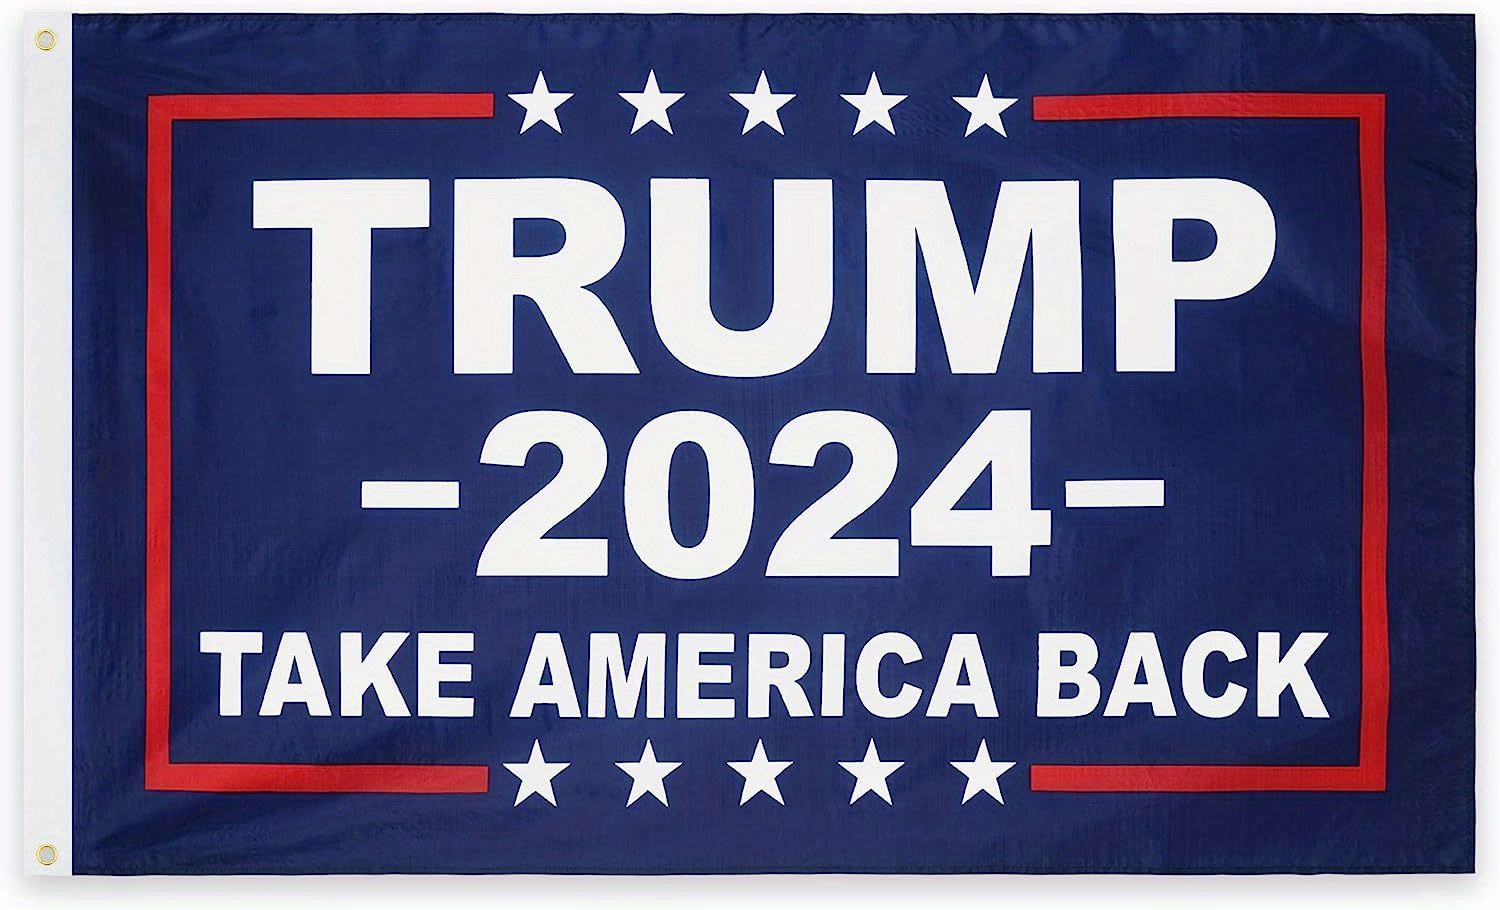 1pc donald trump for president 2024 take america back flag red 3x5 foot with grommets party bunner party supplies party decor home decor room decor details 1